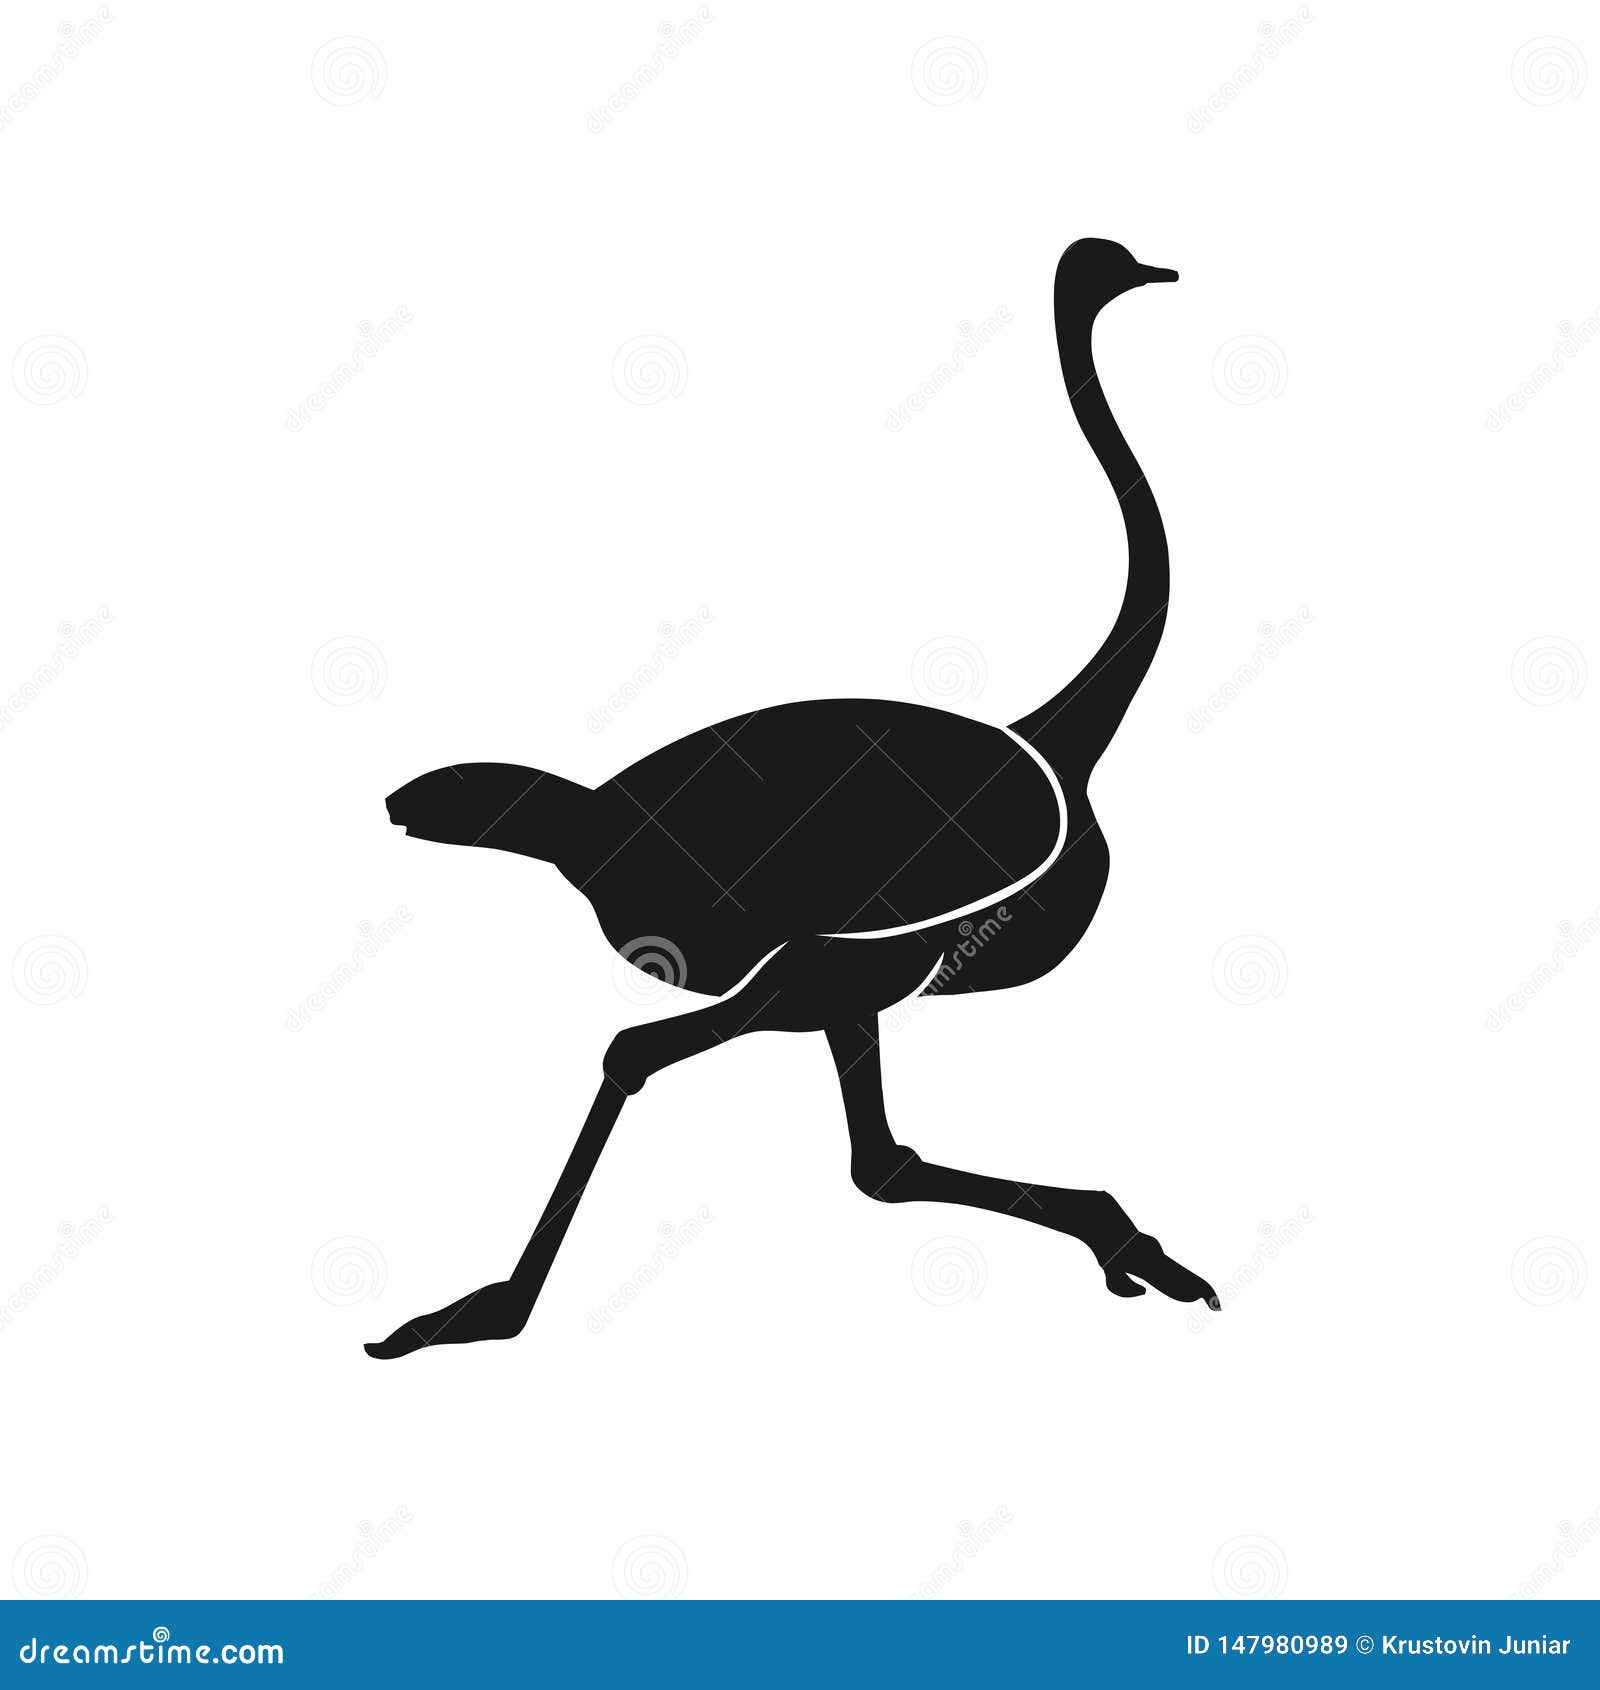 Download Silhouette Running Ostrich Vector Stock Vector ...